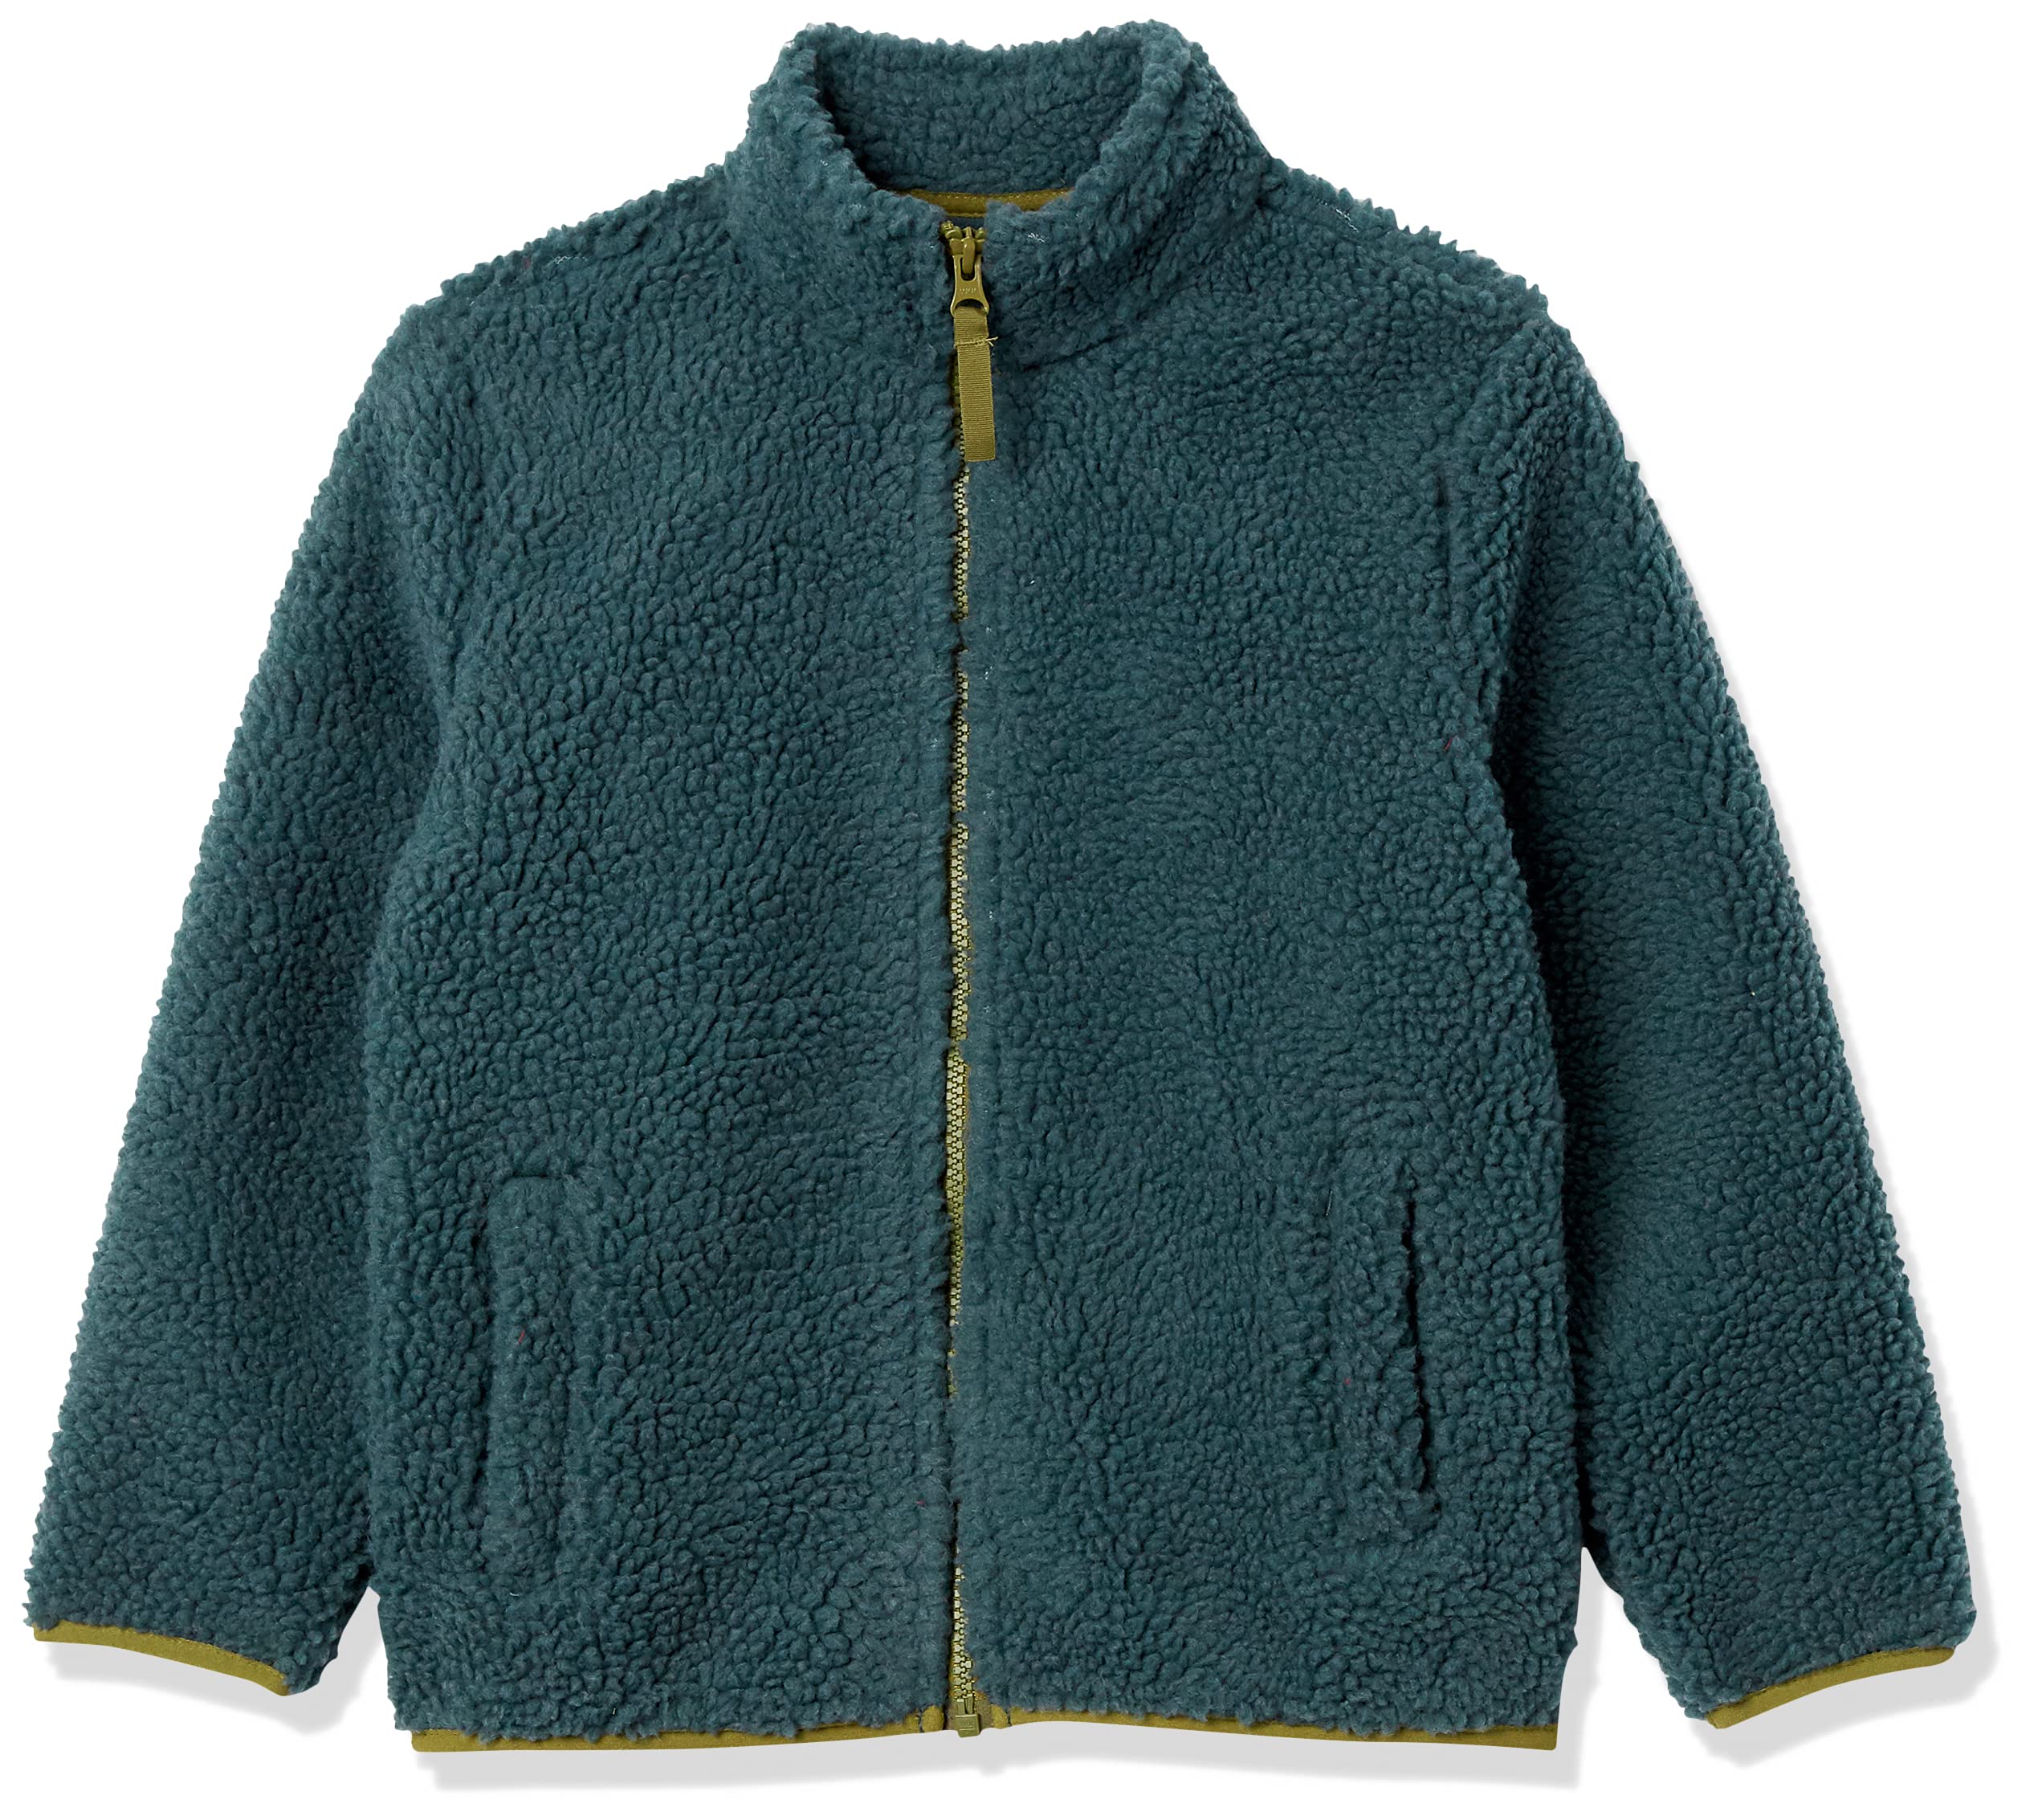 Amazon Essentials Boys and Toddlers' Polar Fleece Lined Sherpa Full-Zip Jacket